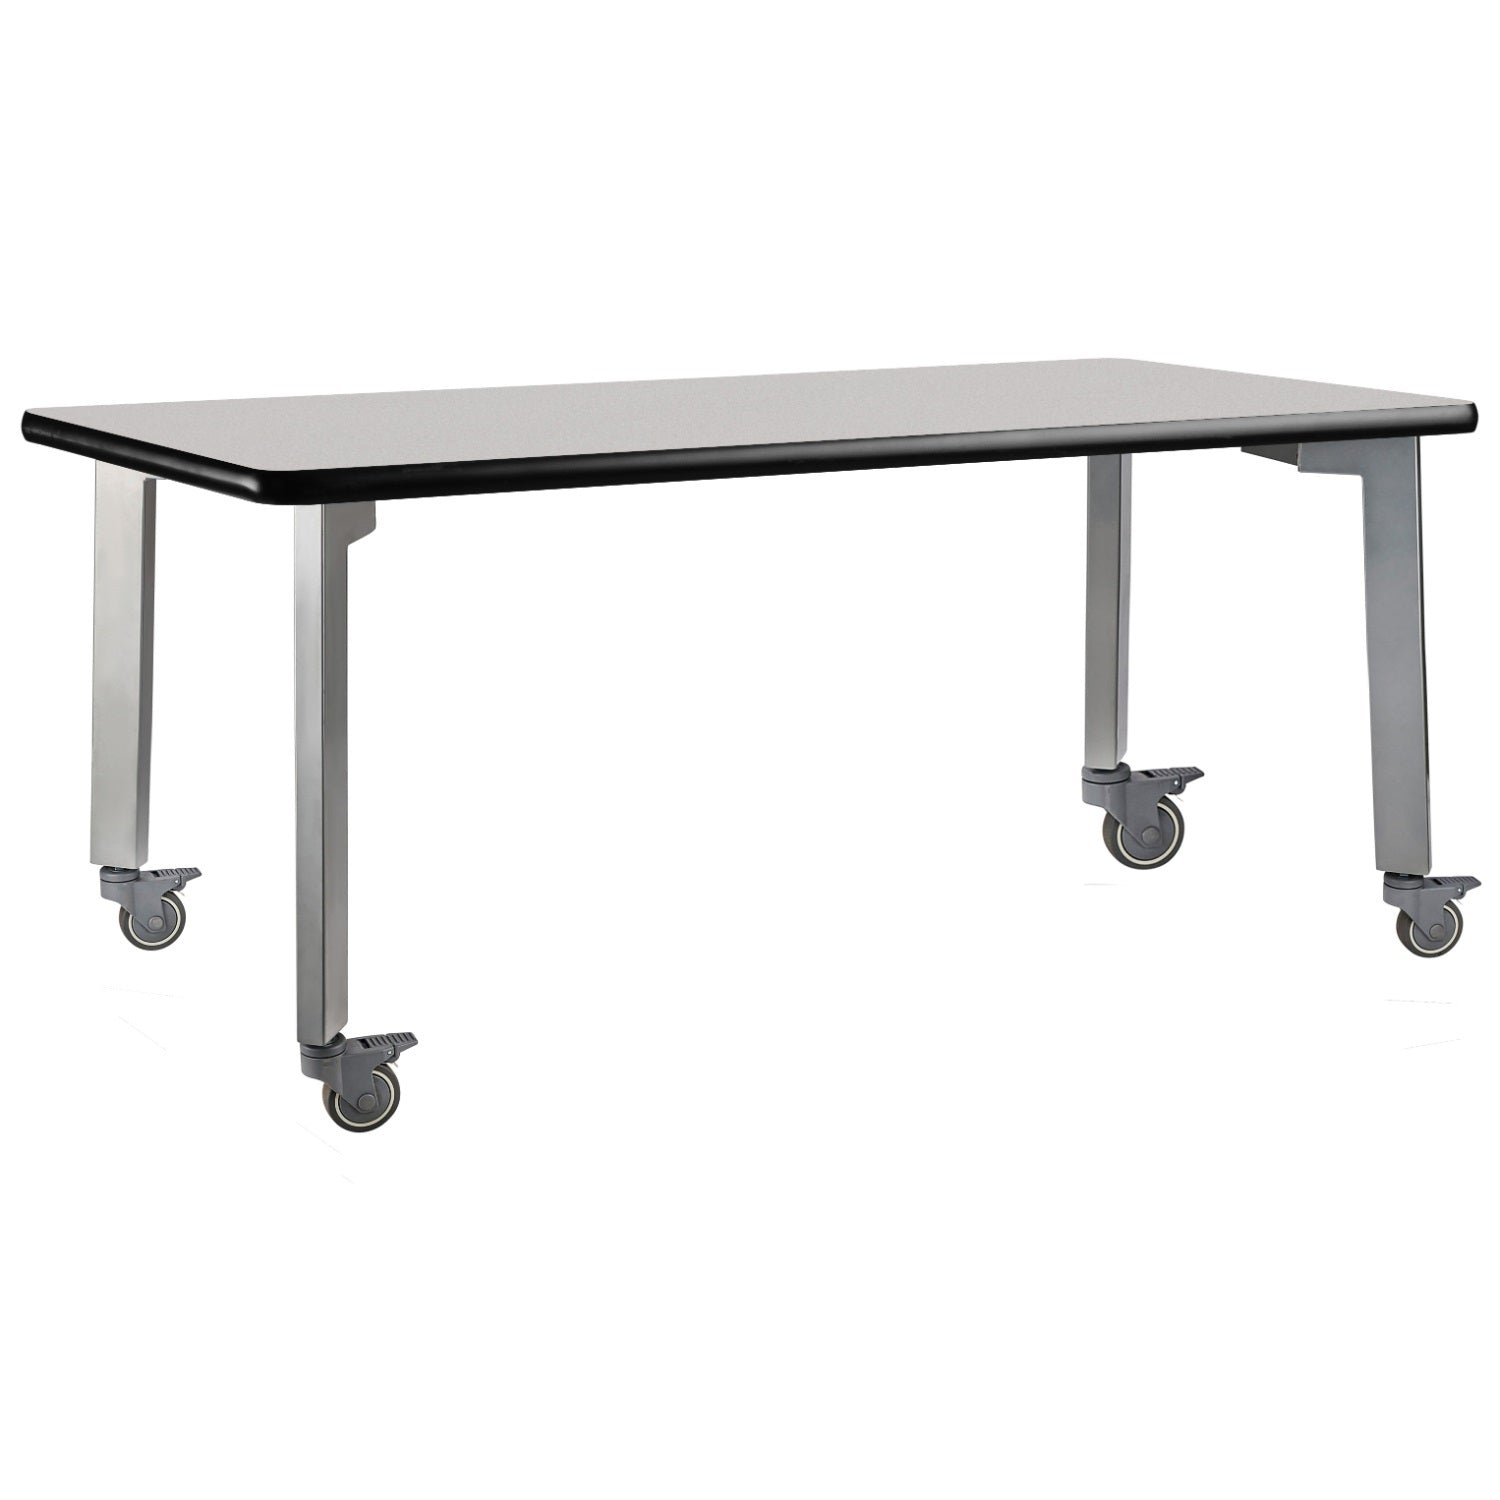 Titan Mobile Table, 48" x 54", Standard High Pressure Laminate Top with Particleboard Core and T-Mold Edge